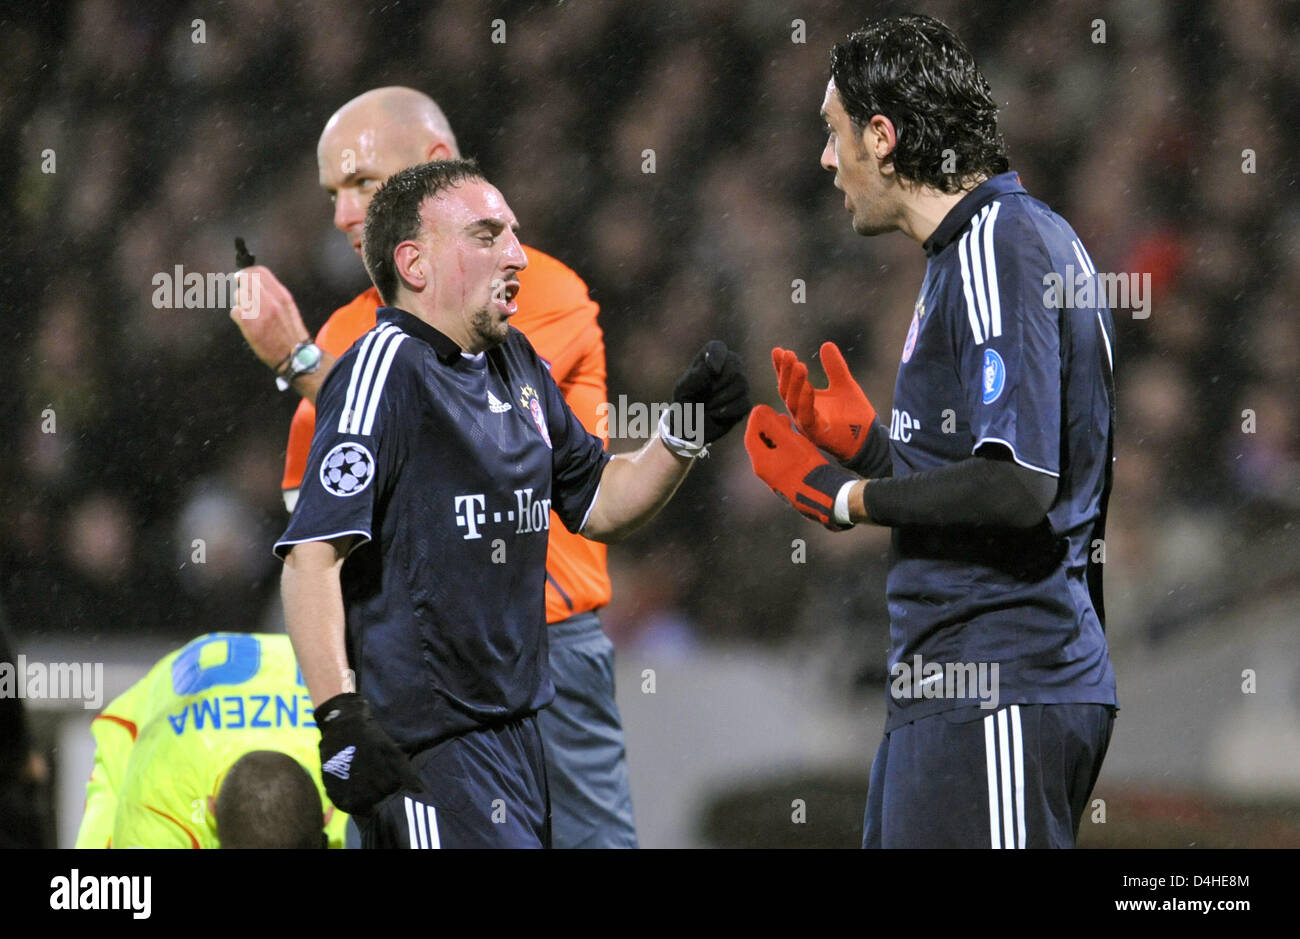 FC Bayern Munich players Franck Ribery (L) and Luca Toni quarrel during the Champions League Group F match against Olympique Lyon at Stade de Gerland in Lyon, France, 10 December 2008. Bayern Munich defeated Lyon 3-2 securing the first place in UEFA Champions League Group F. Photo: Andreas Gebert Stock Photo